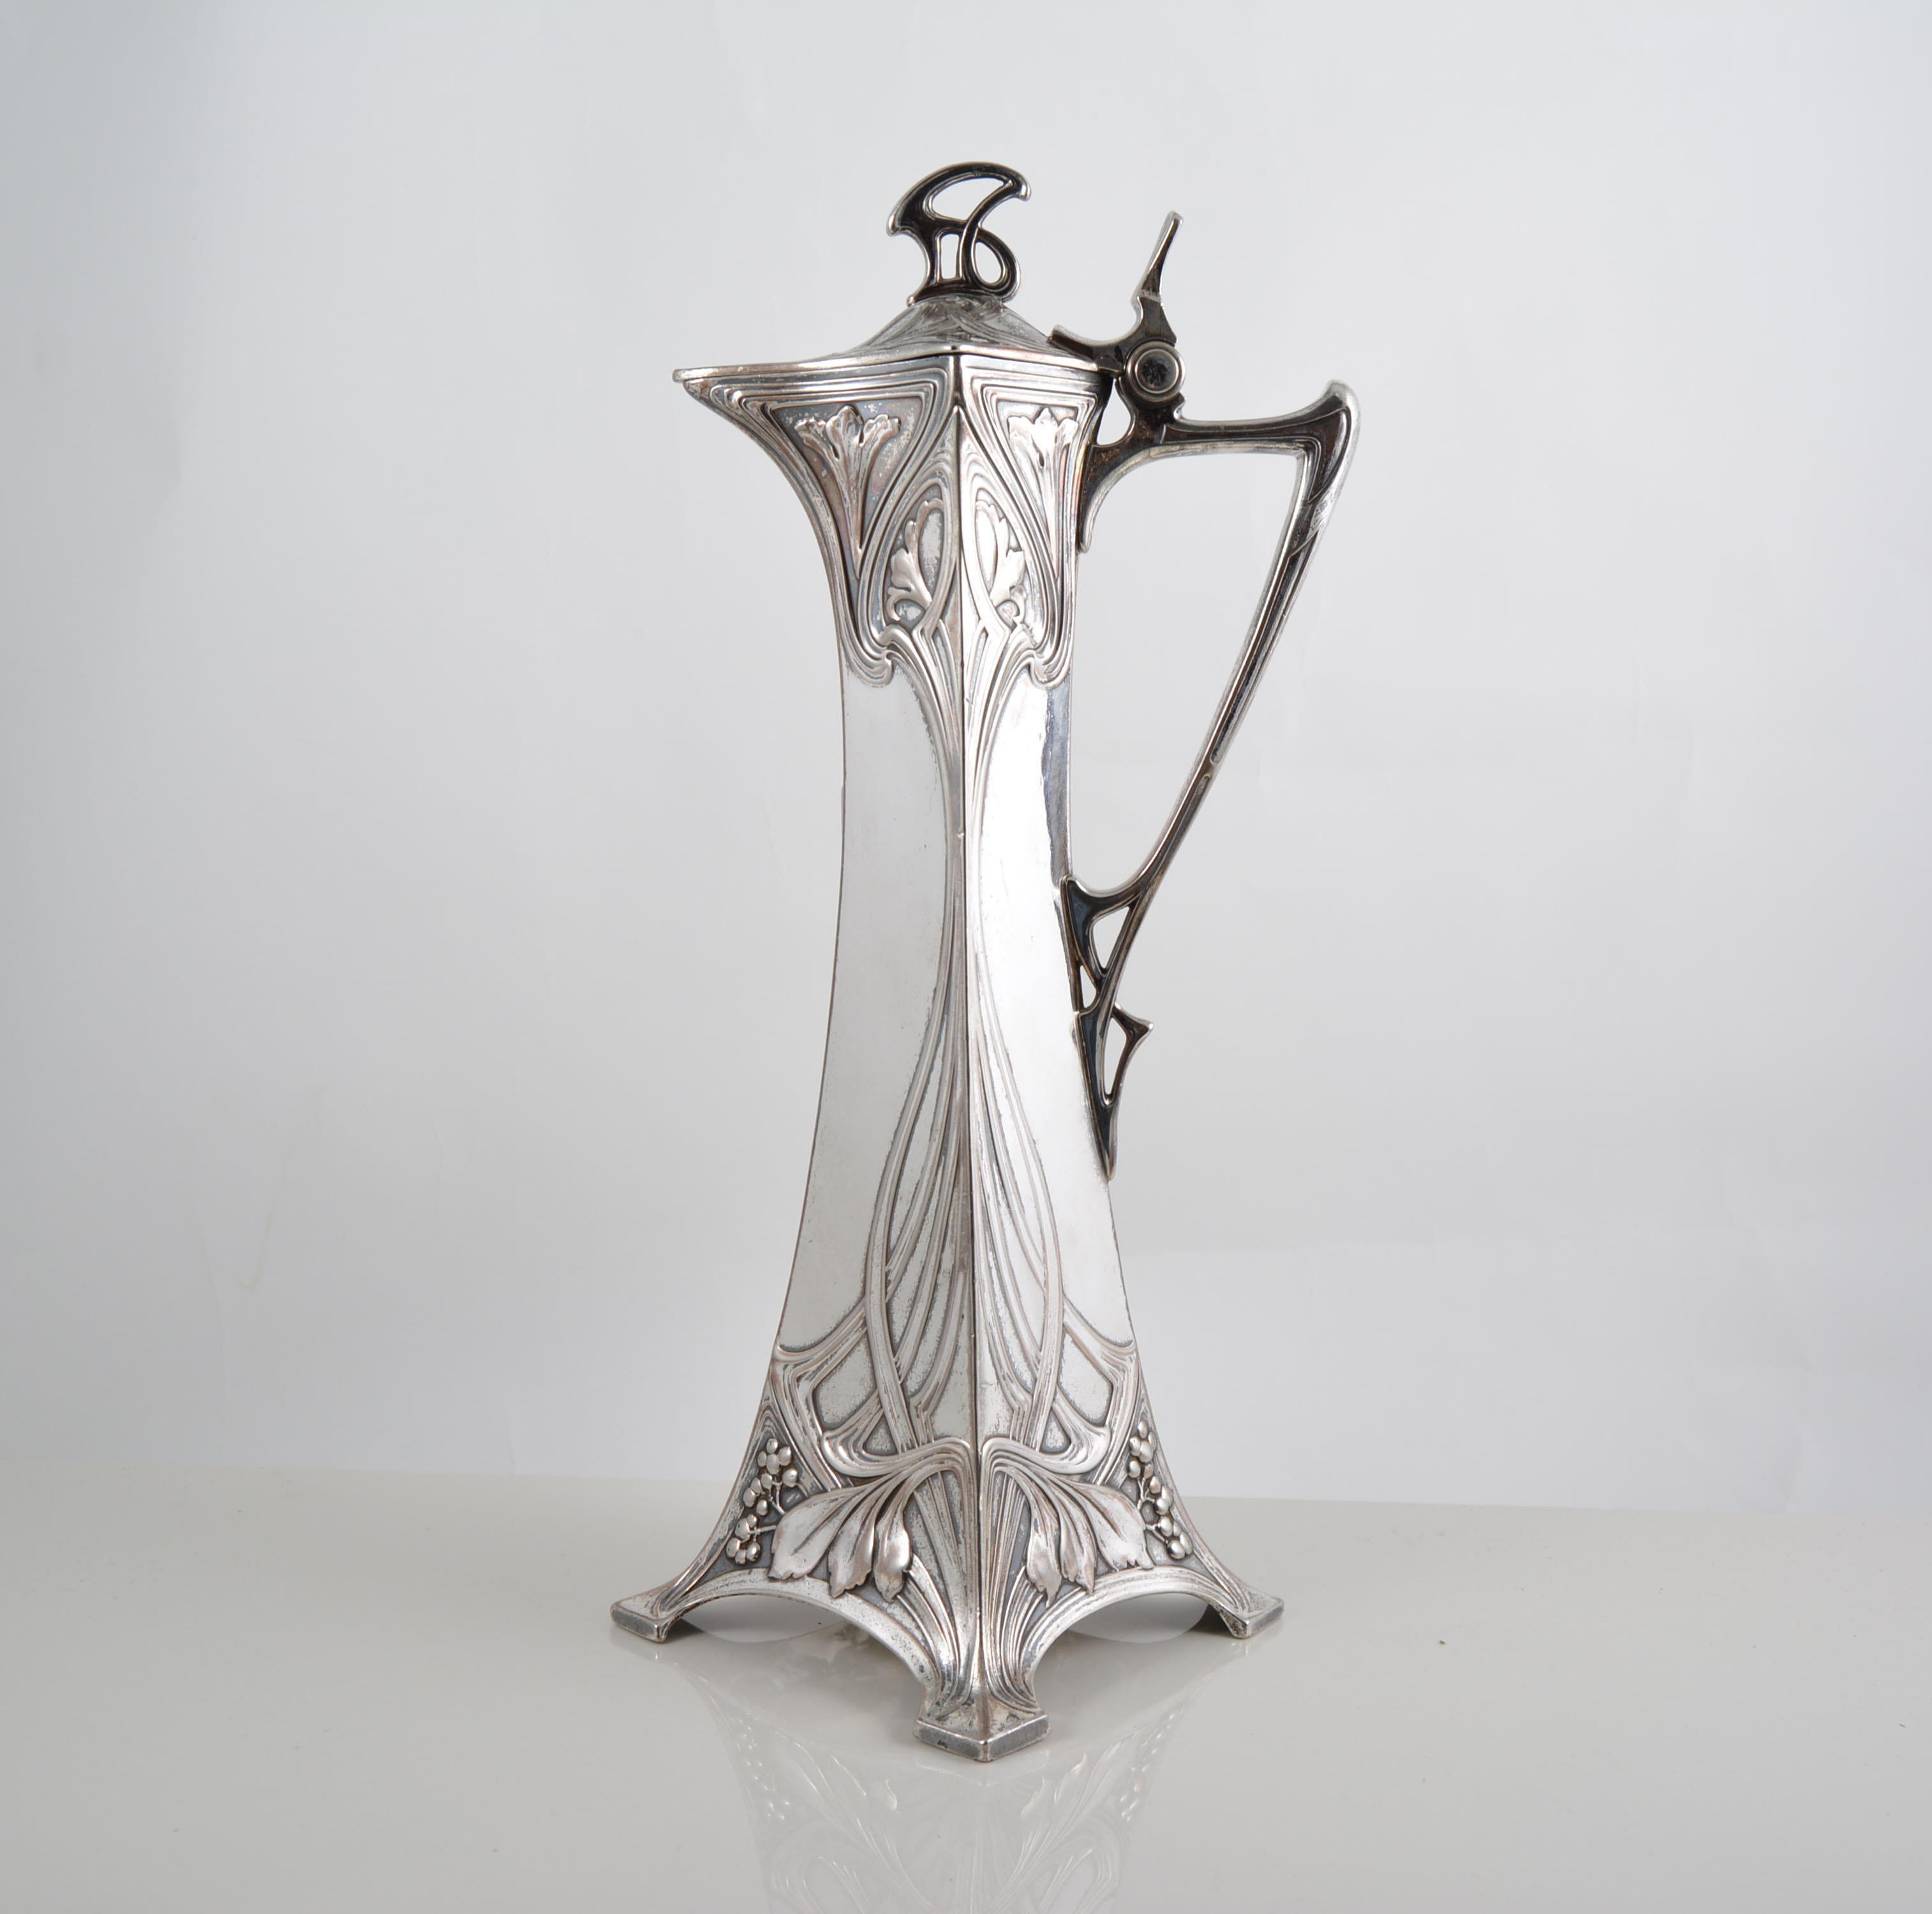 Art Nouveau electroplated claret jug, by WMF, slender tapering form with a hinged lid,